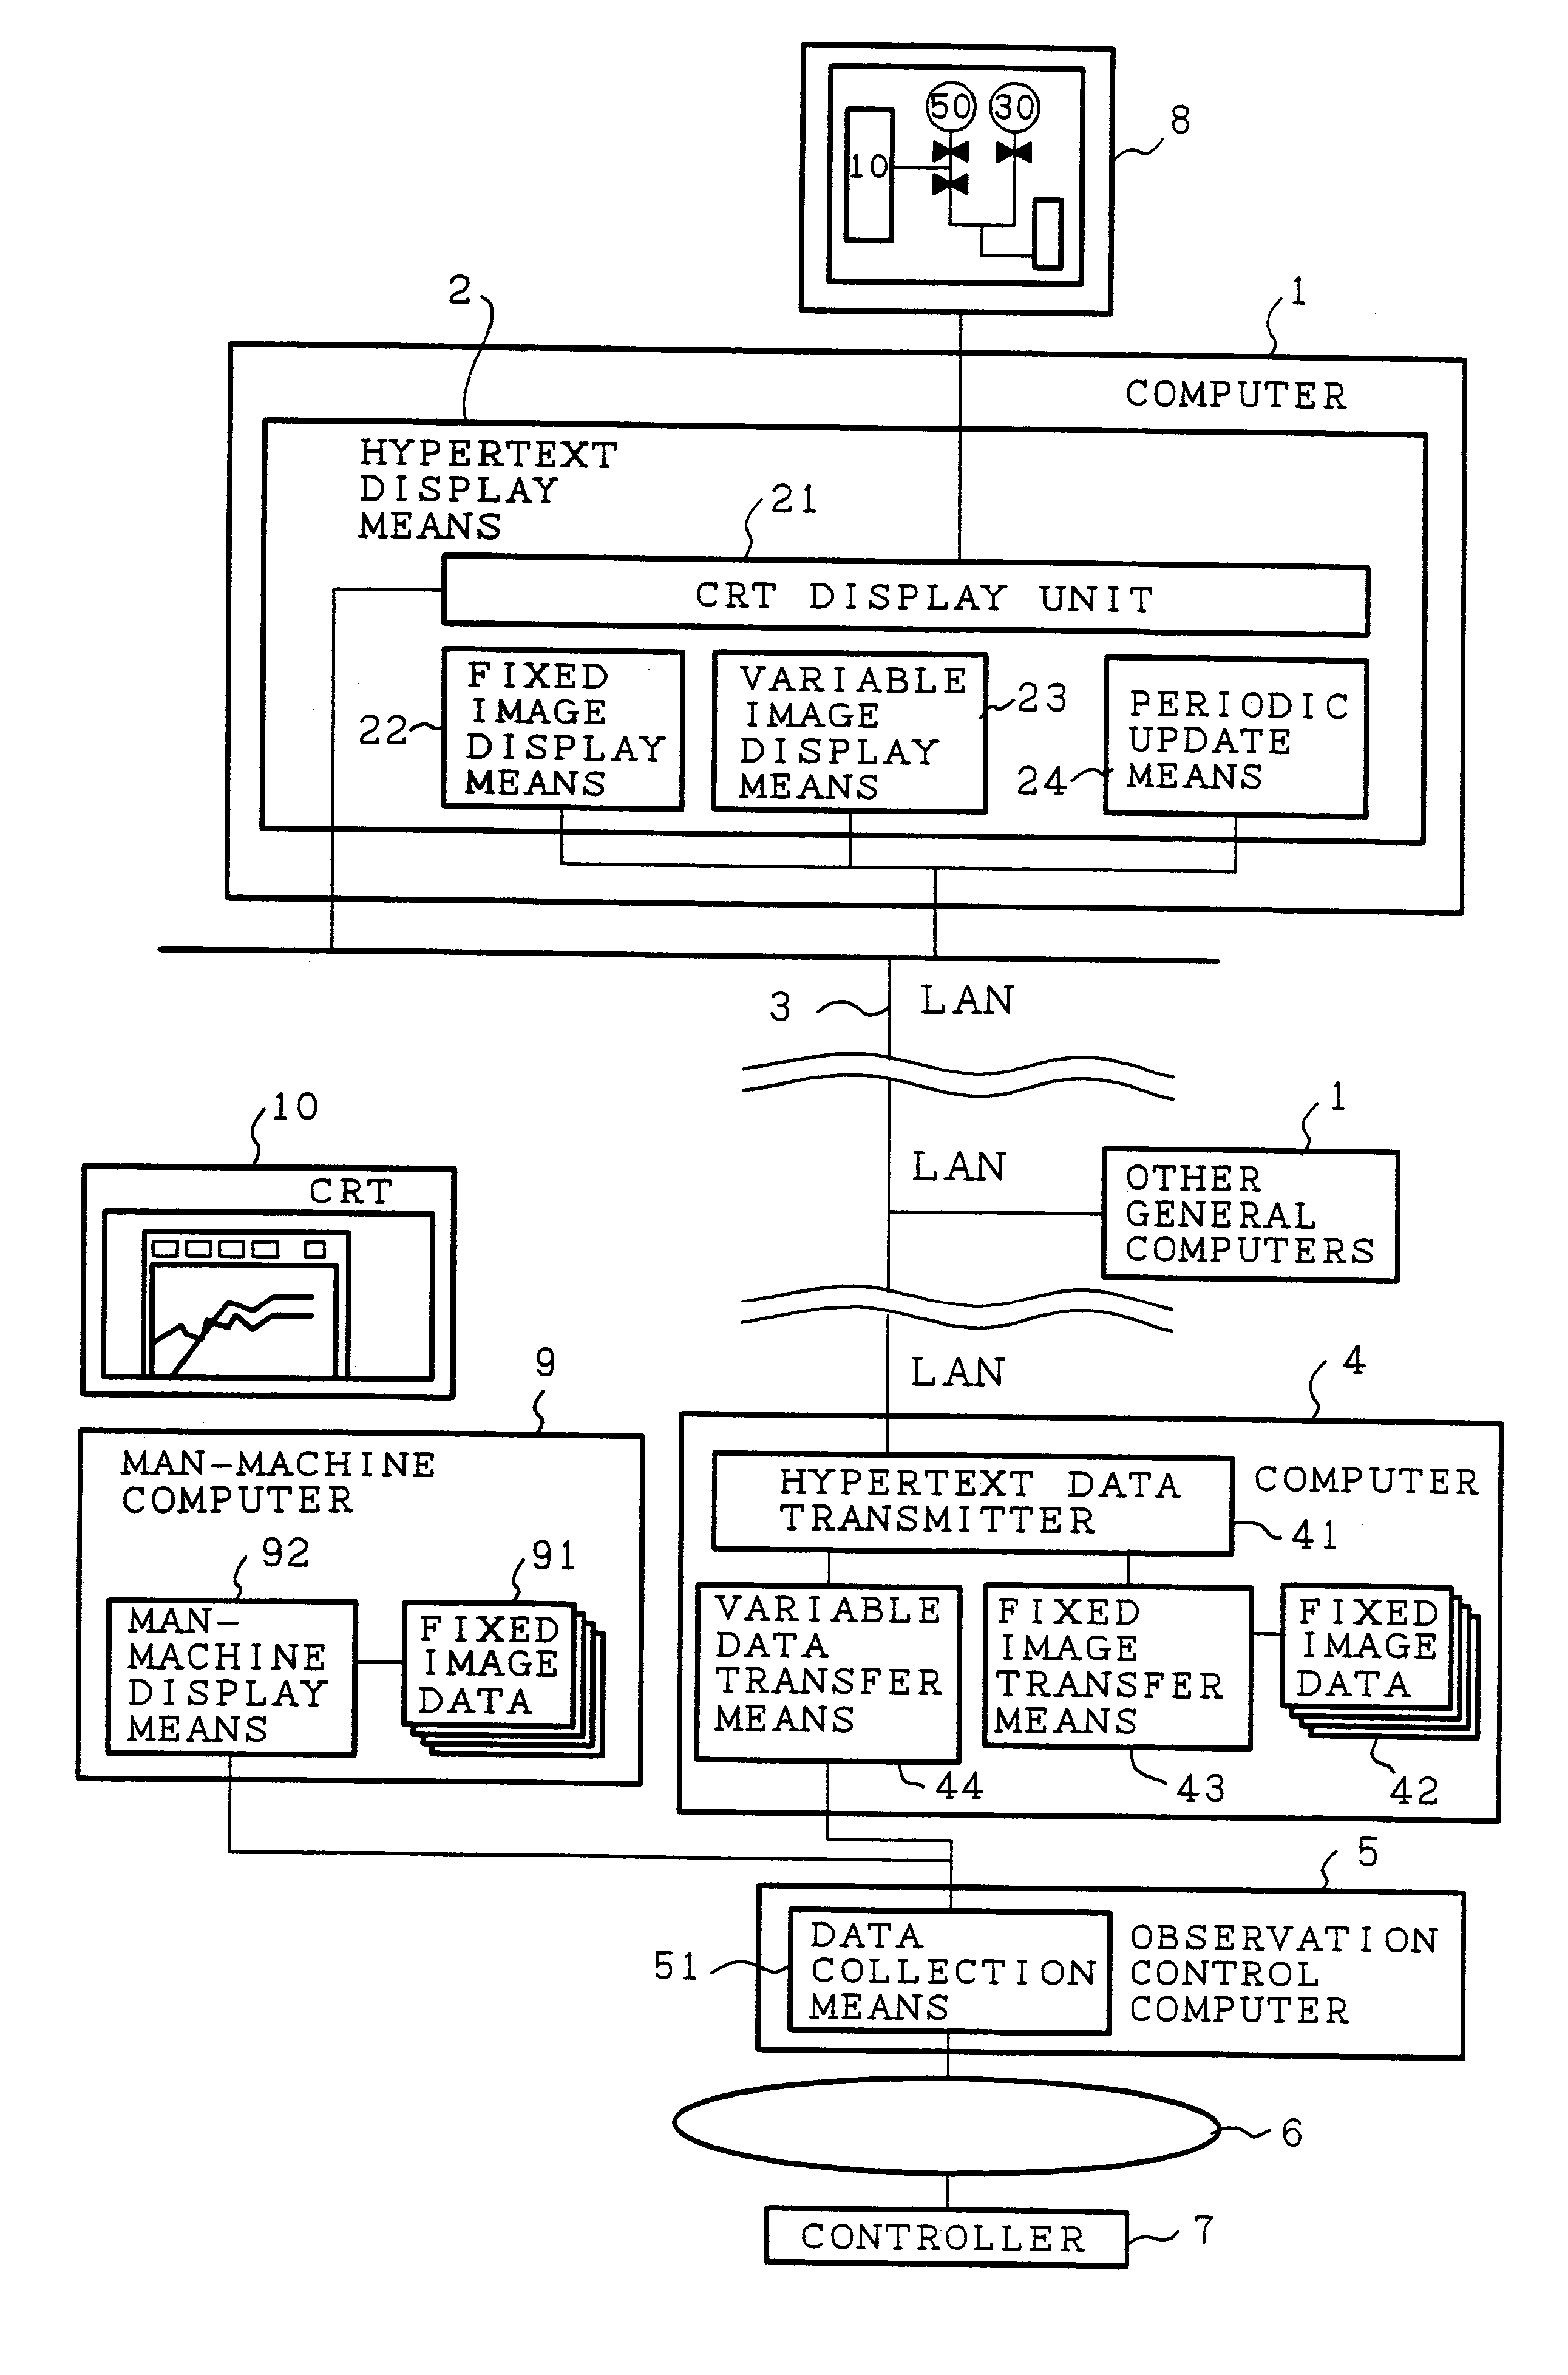 Remote observation system having transmission line for isolating local area network at data gathering site from remote monitoring site, and having provision for data request from remote monitoring site via the transmission line